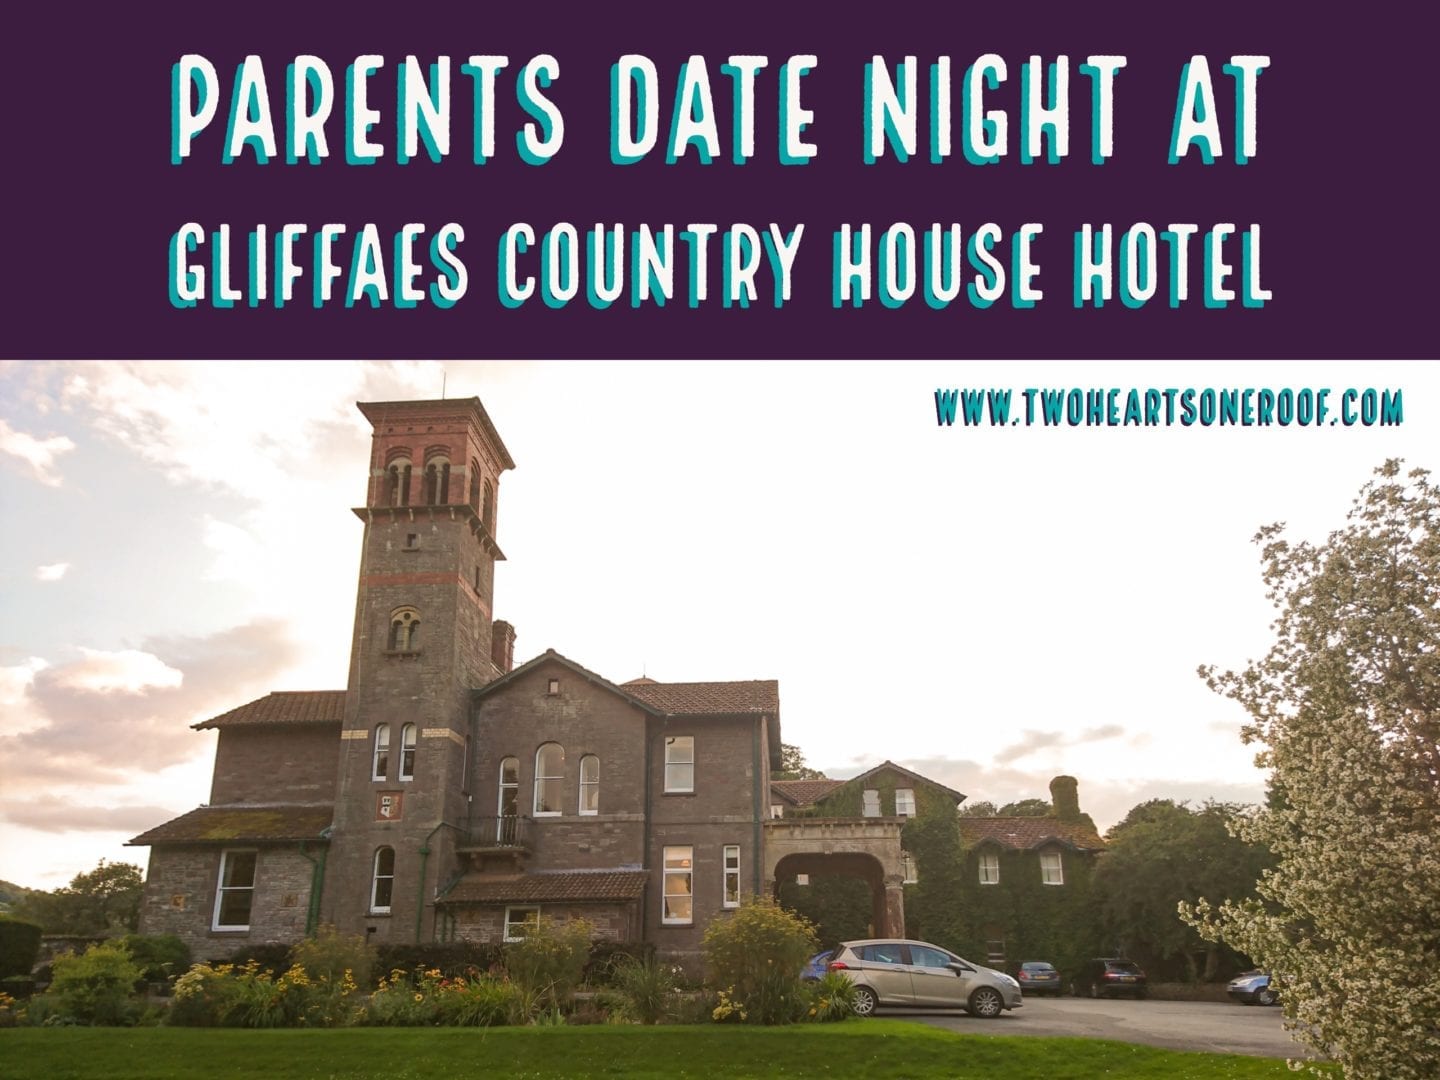 Our Adventures // Parents Date Night at Gliffaes Country House Hotel